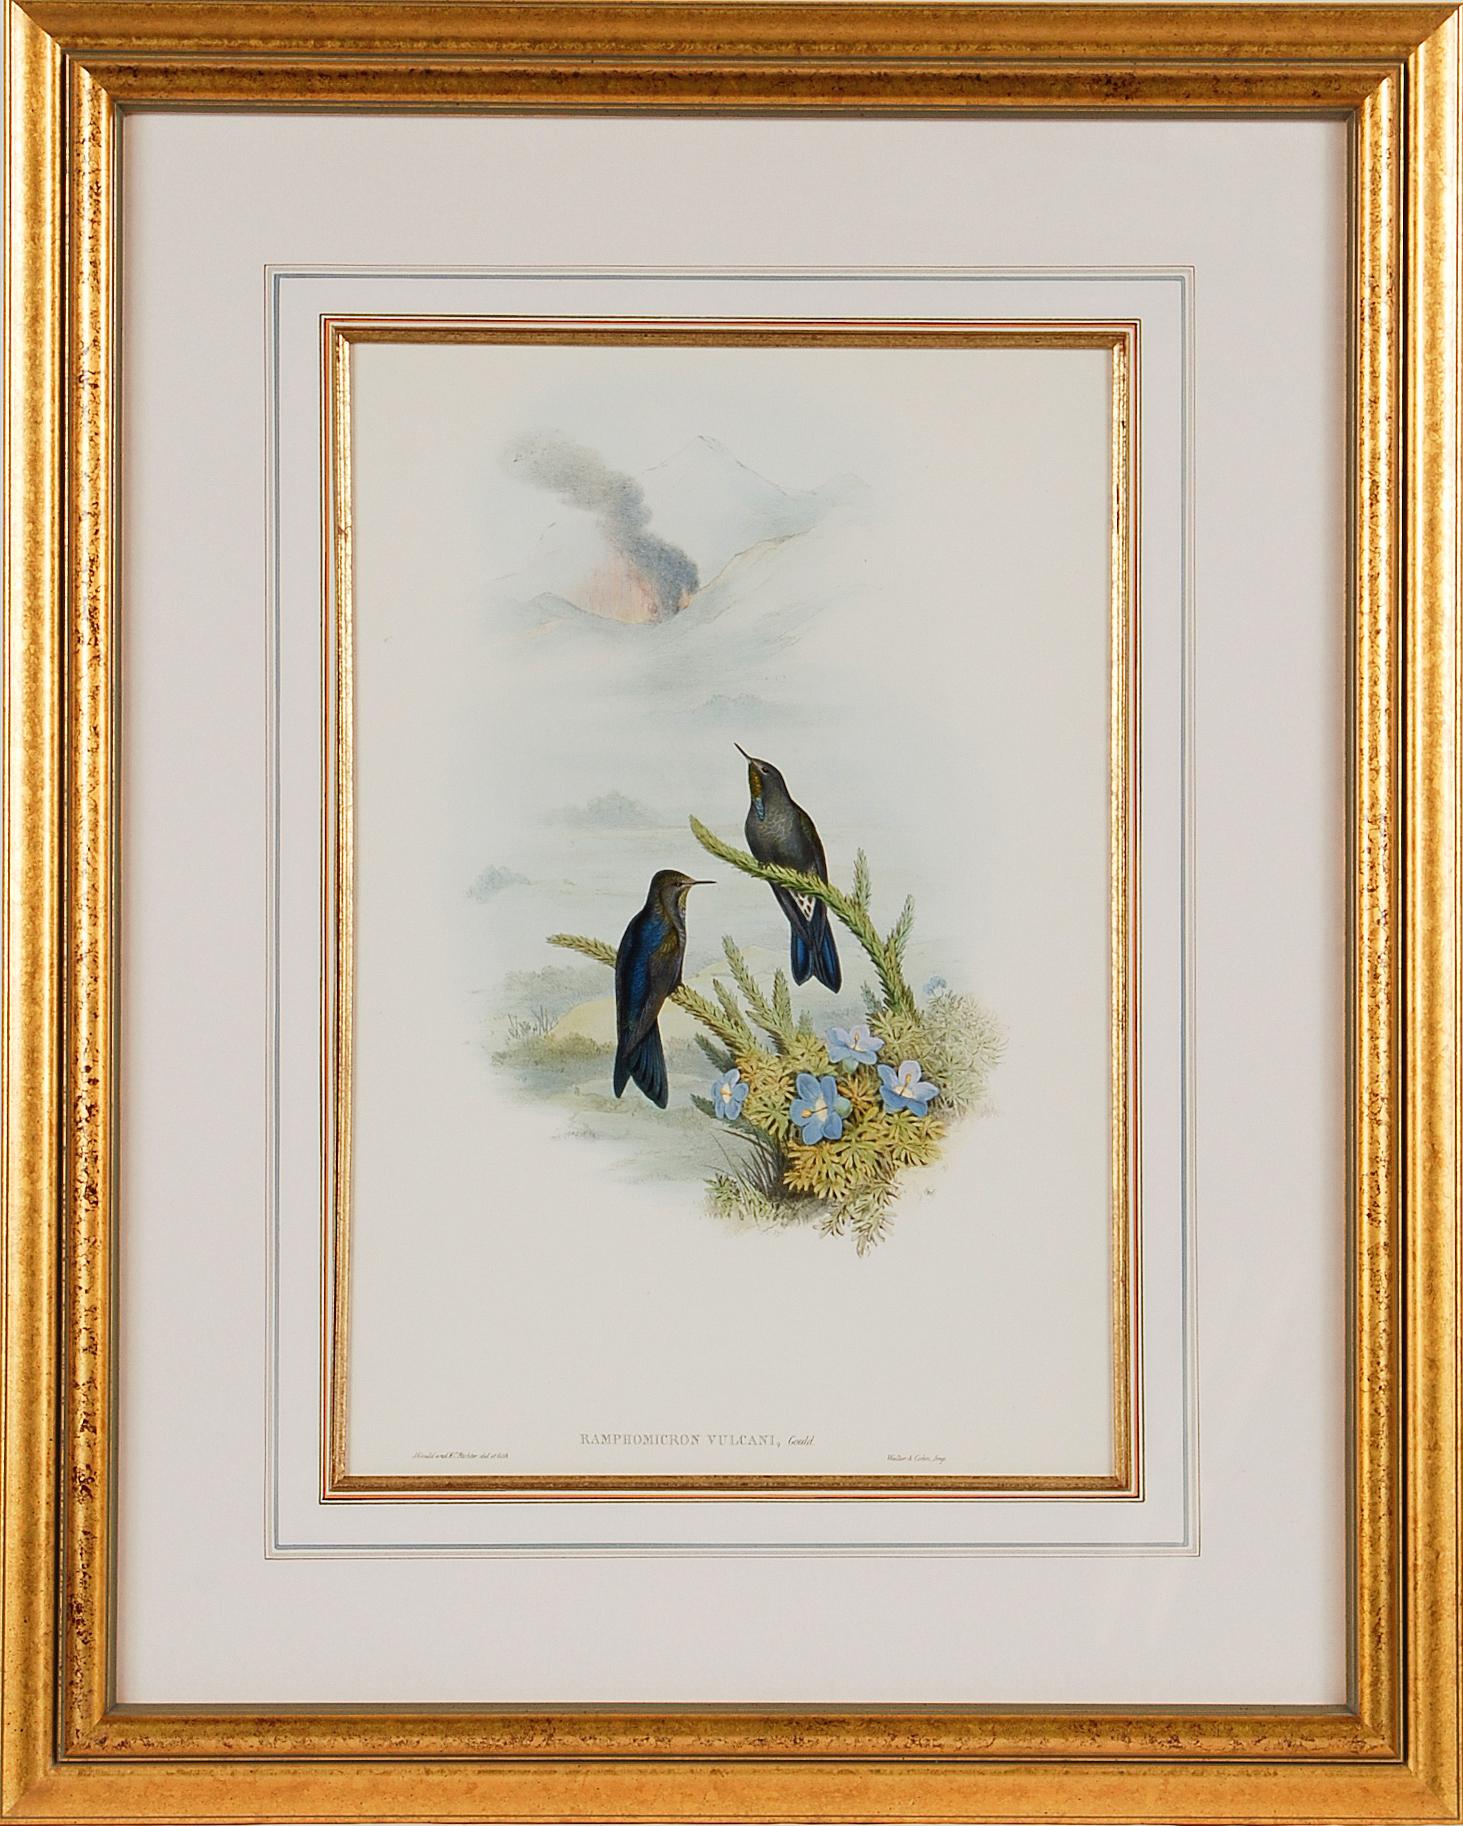 John Gould and Henry Constantine Richter Animal Print - Thorn-Bill Hummingbirds: A Framed 19th C. Hand-colored Lithograph by Gould